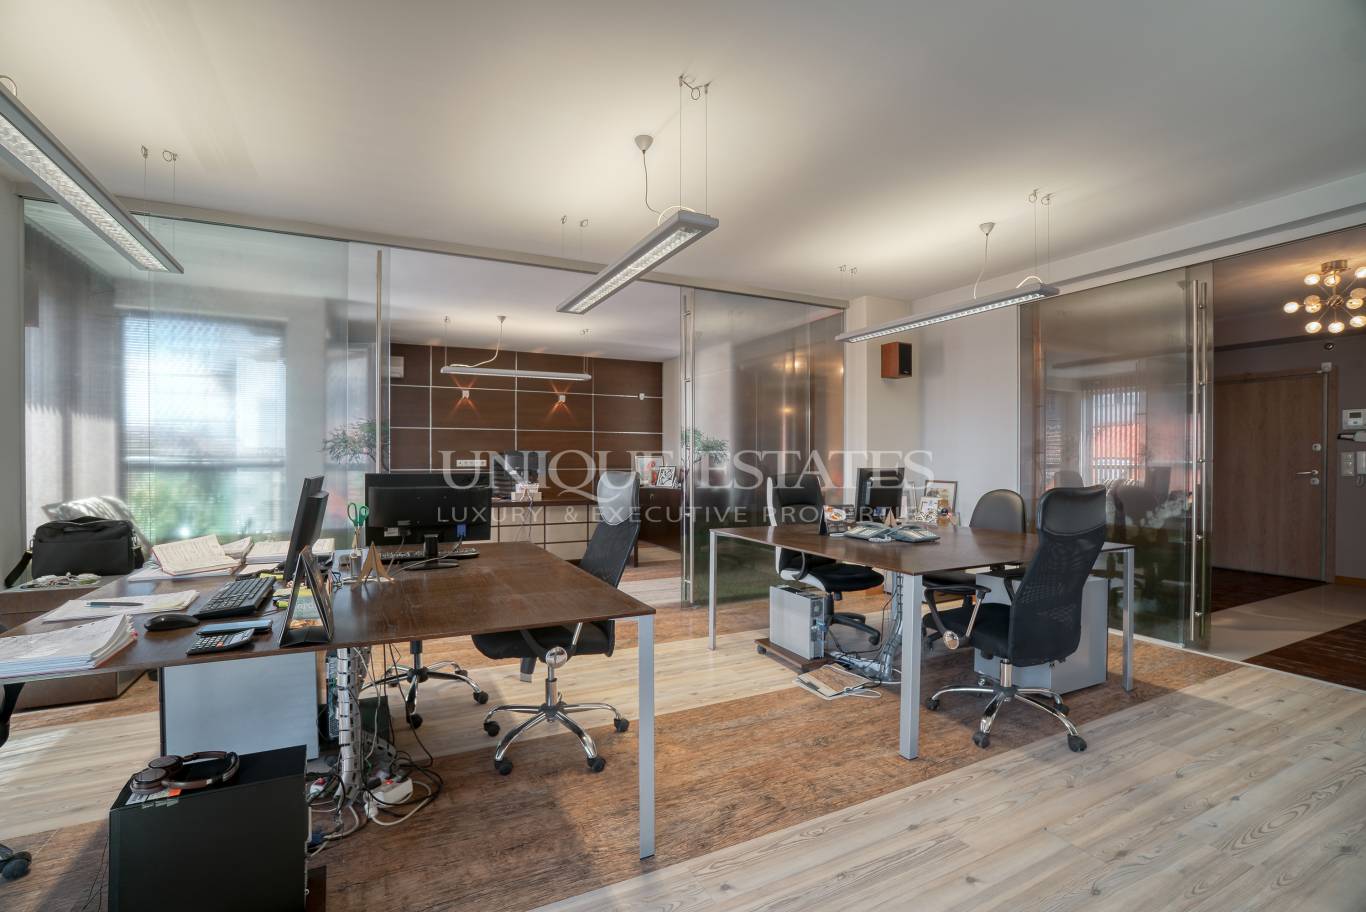 Office for rent in Sofia, Downtown with listing ID: K19190 - image 4